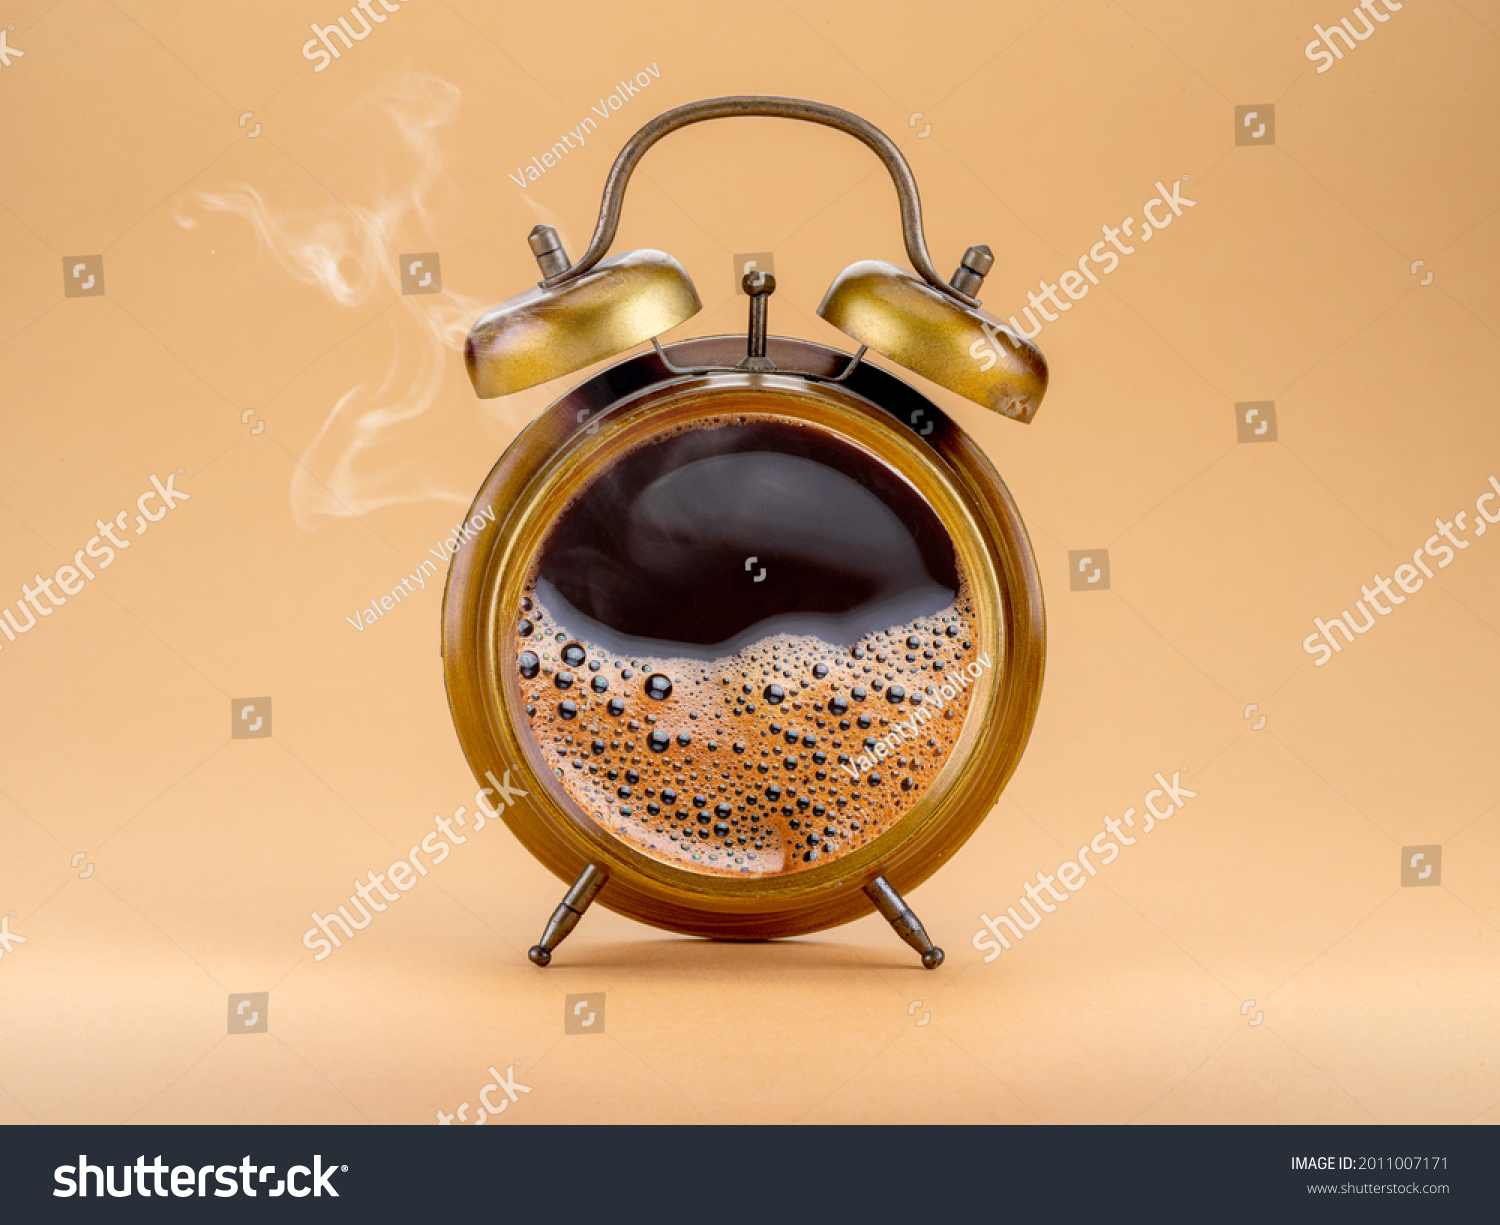 Steamy coffee drink collage. Hot coffee inside of a'larm clock as a symbol coffee time. #2011007171